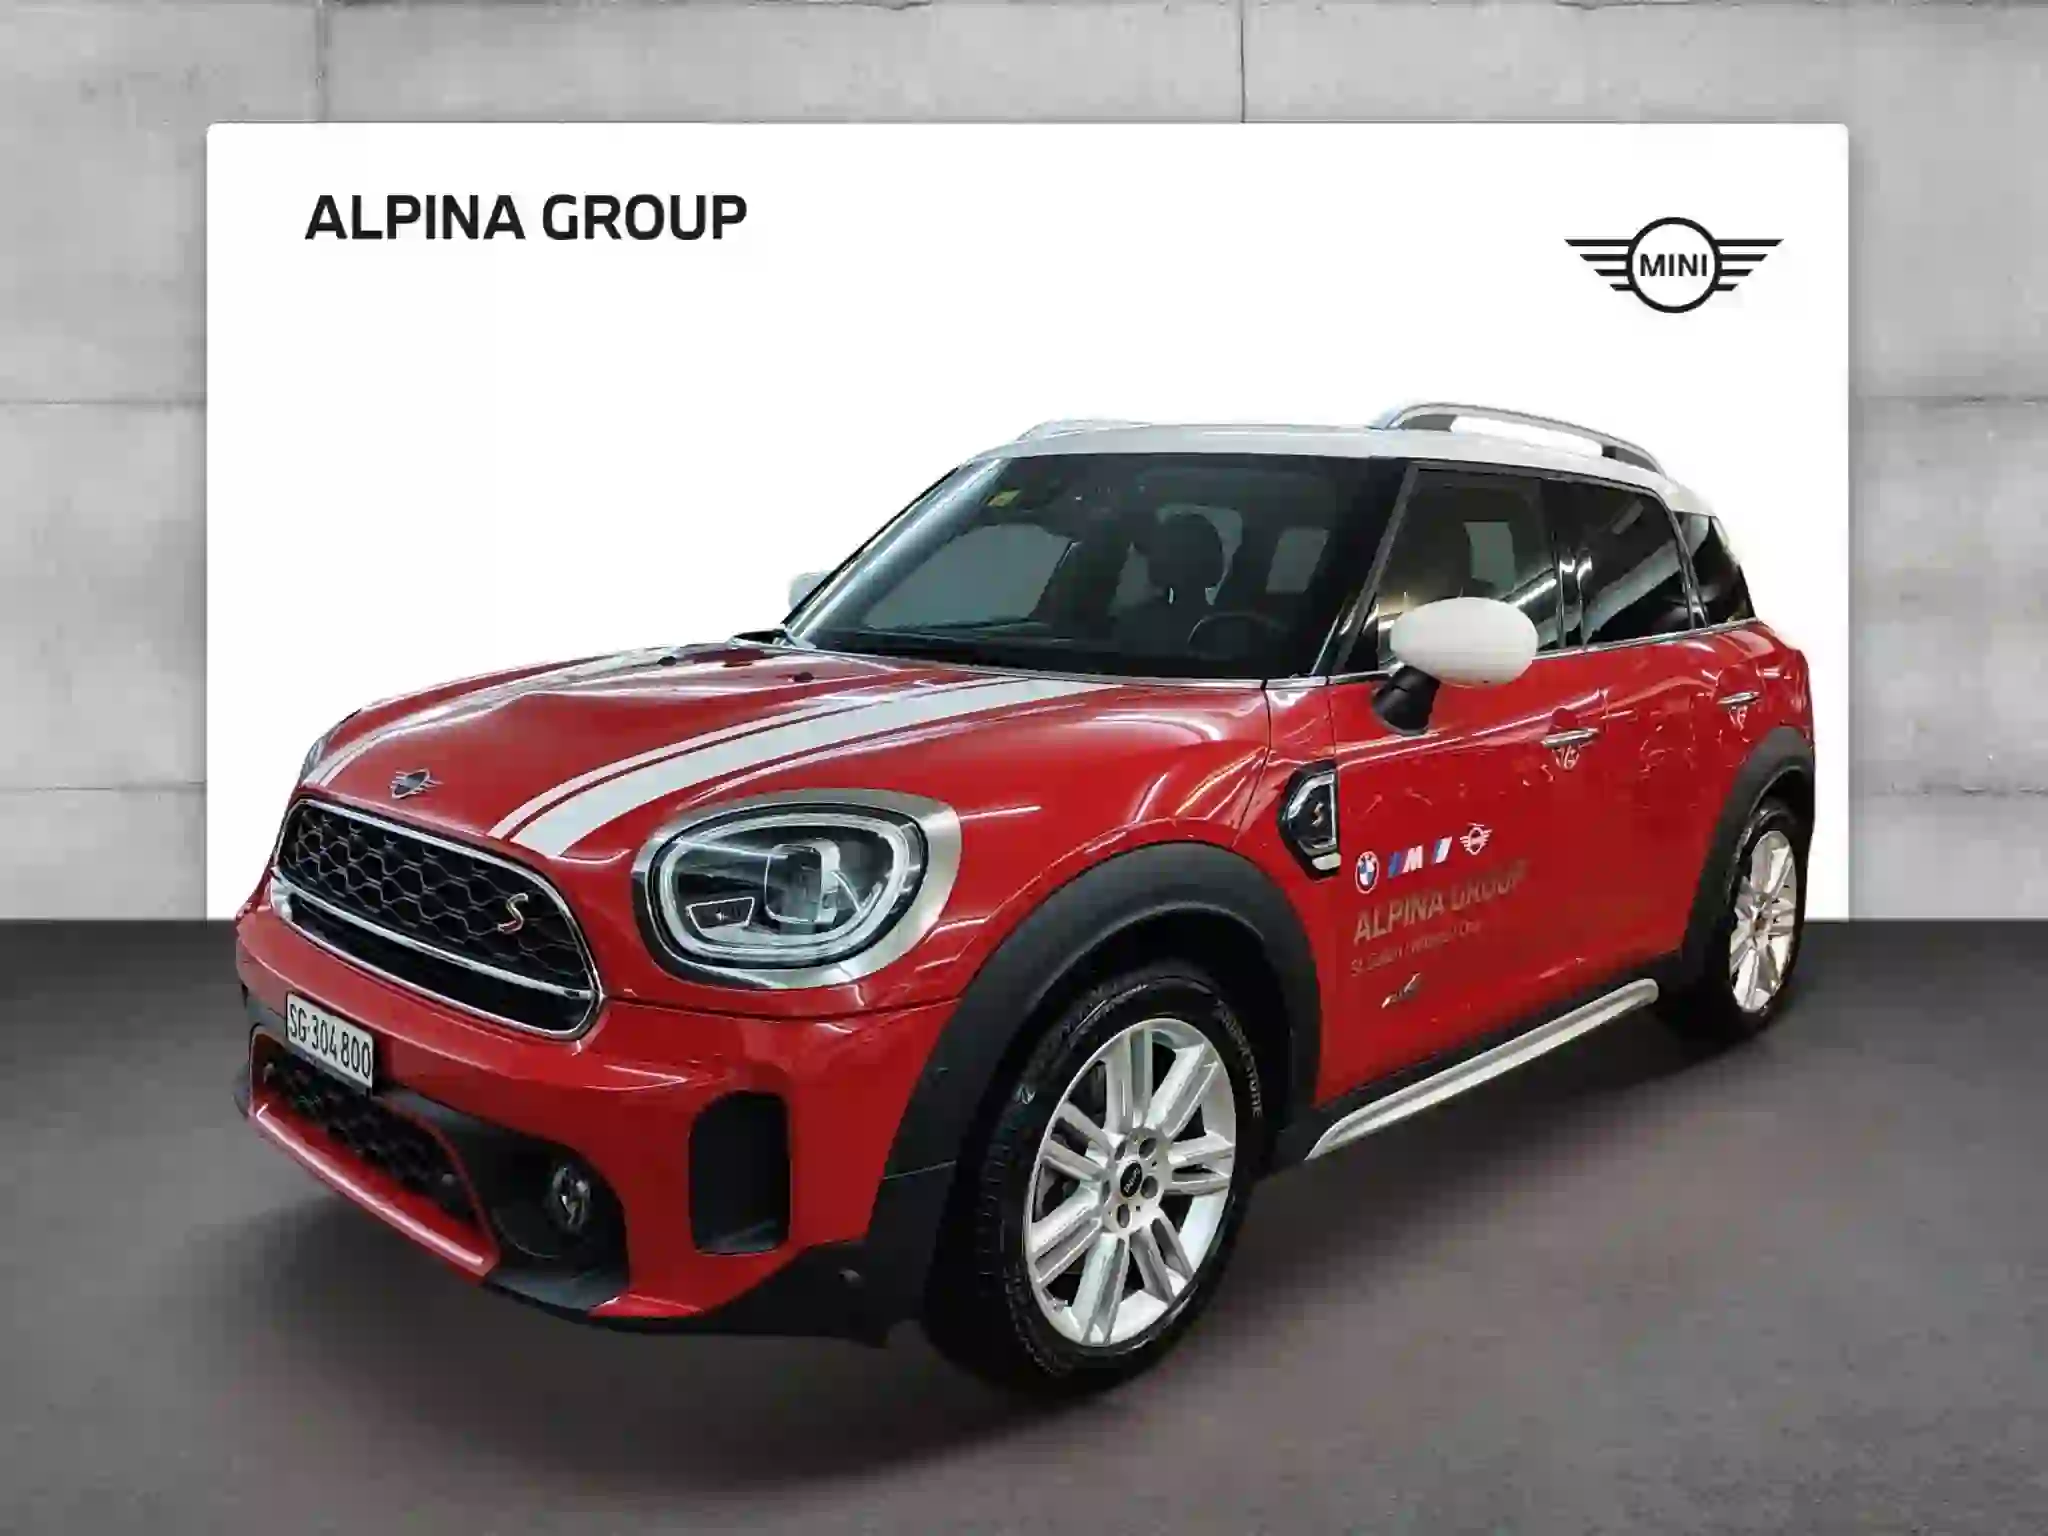 Used Mini Countryman Leasing in Switzerland from CHF 273 